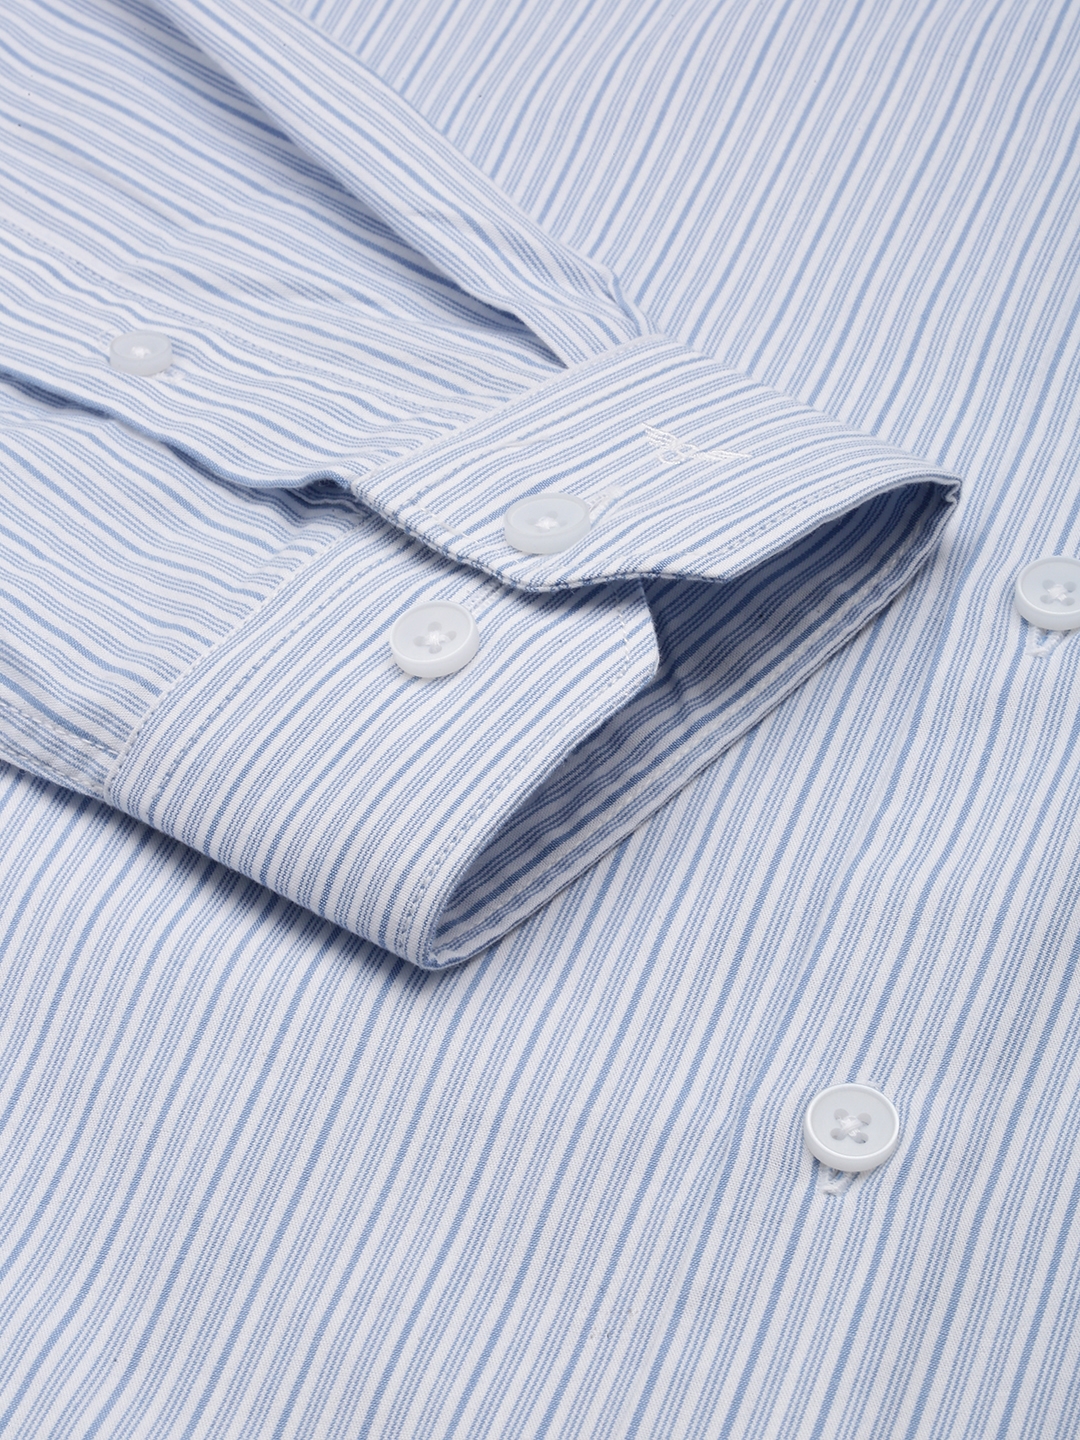 Showoff | SHOWOFF Men's Spread Collar Striped White Classic Shirt 6